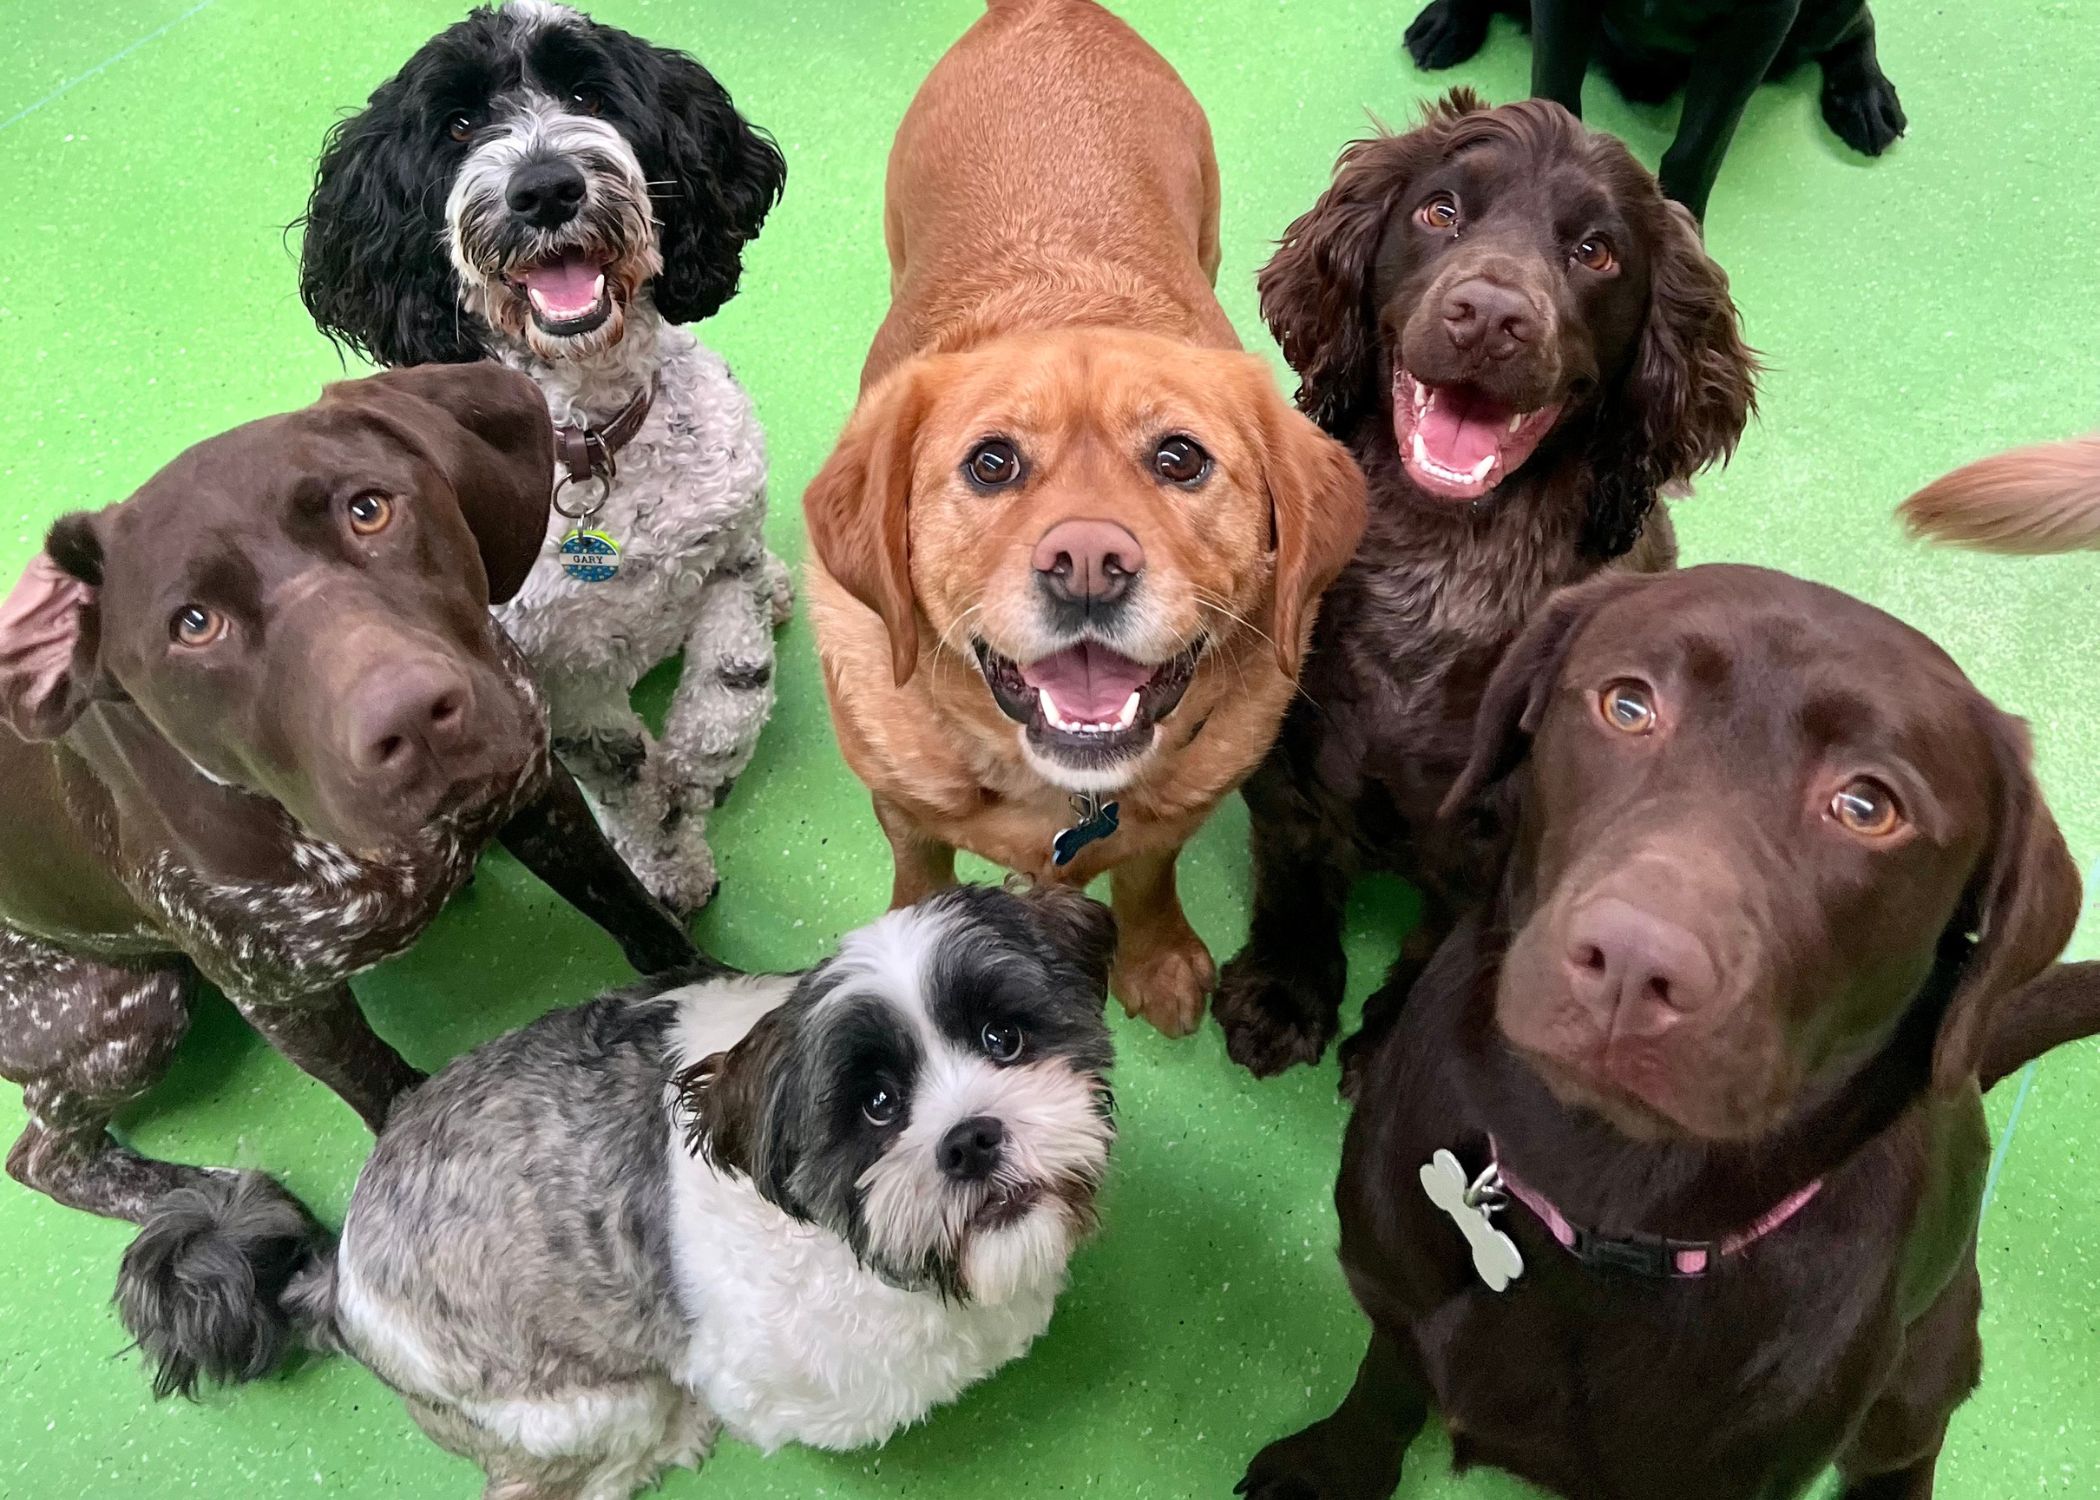 Dogs taking a photo at dog daycare